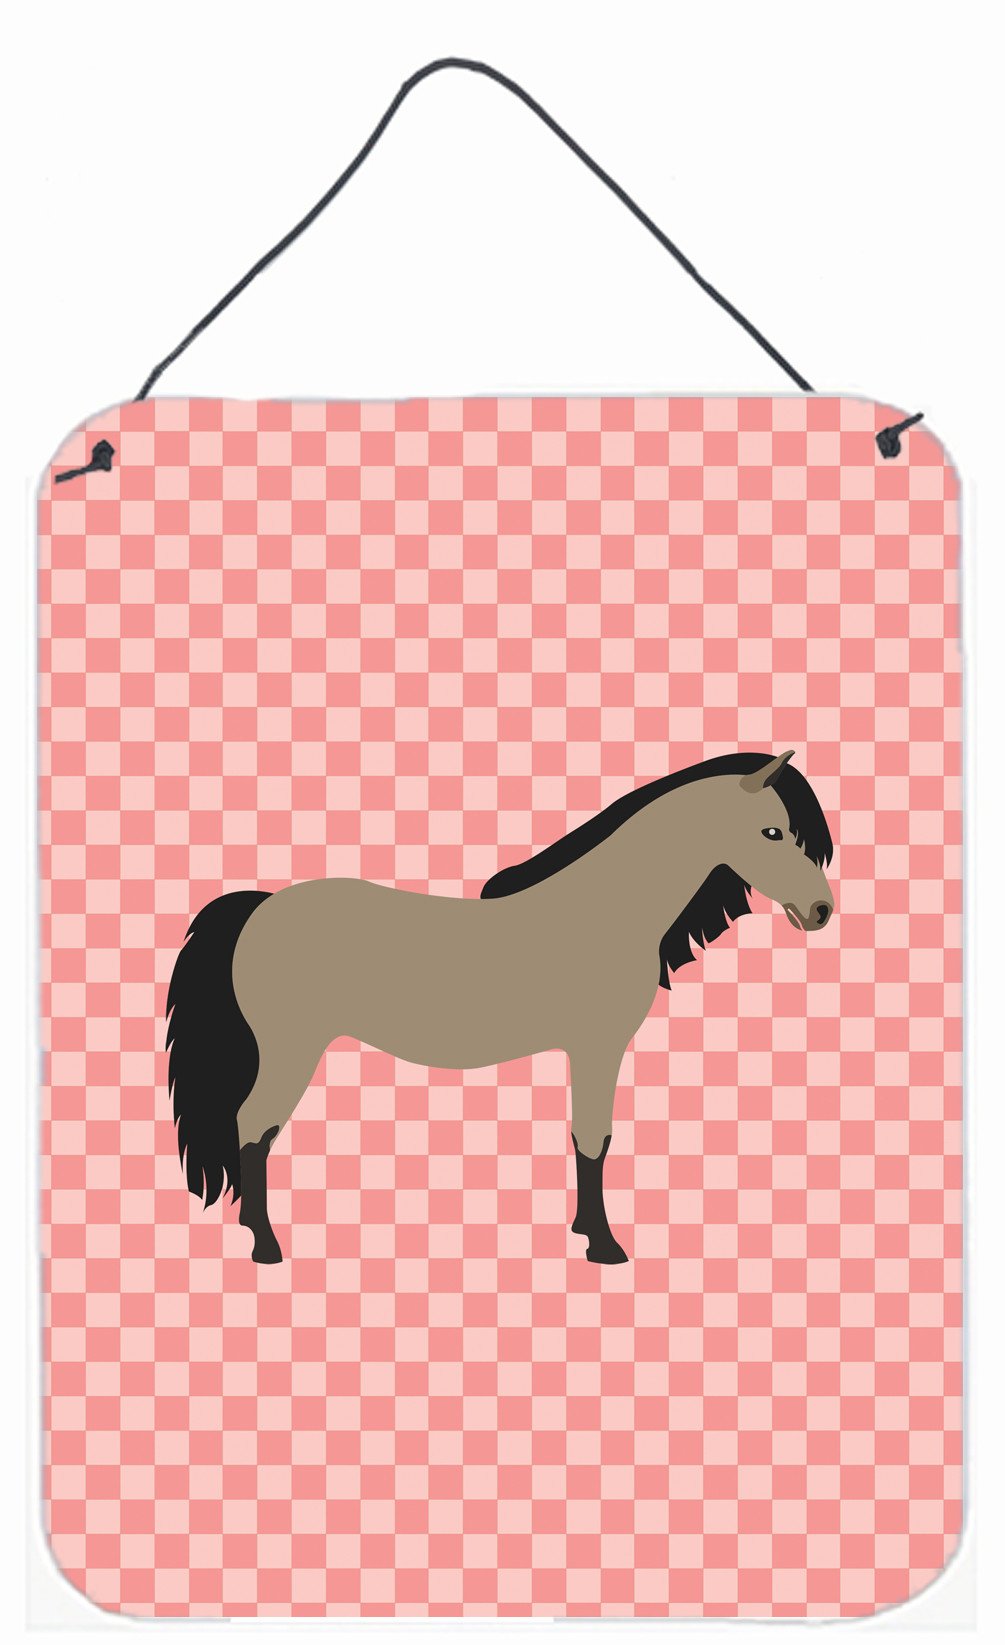 Welsh Pony Horse Pink Check Wall or Door Hanging Prints BB7910DS1216 by Caroline's Treasures